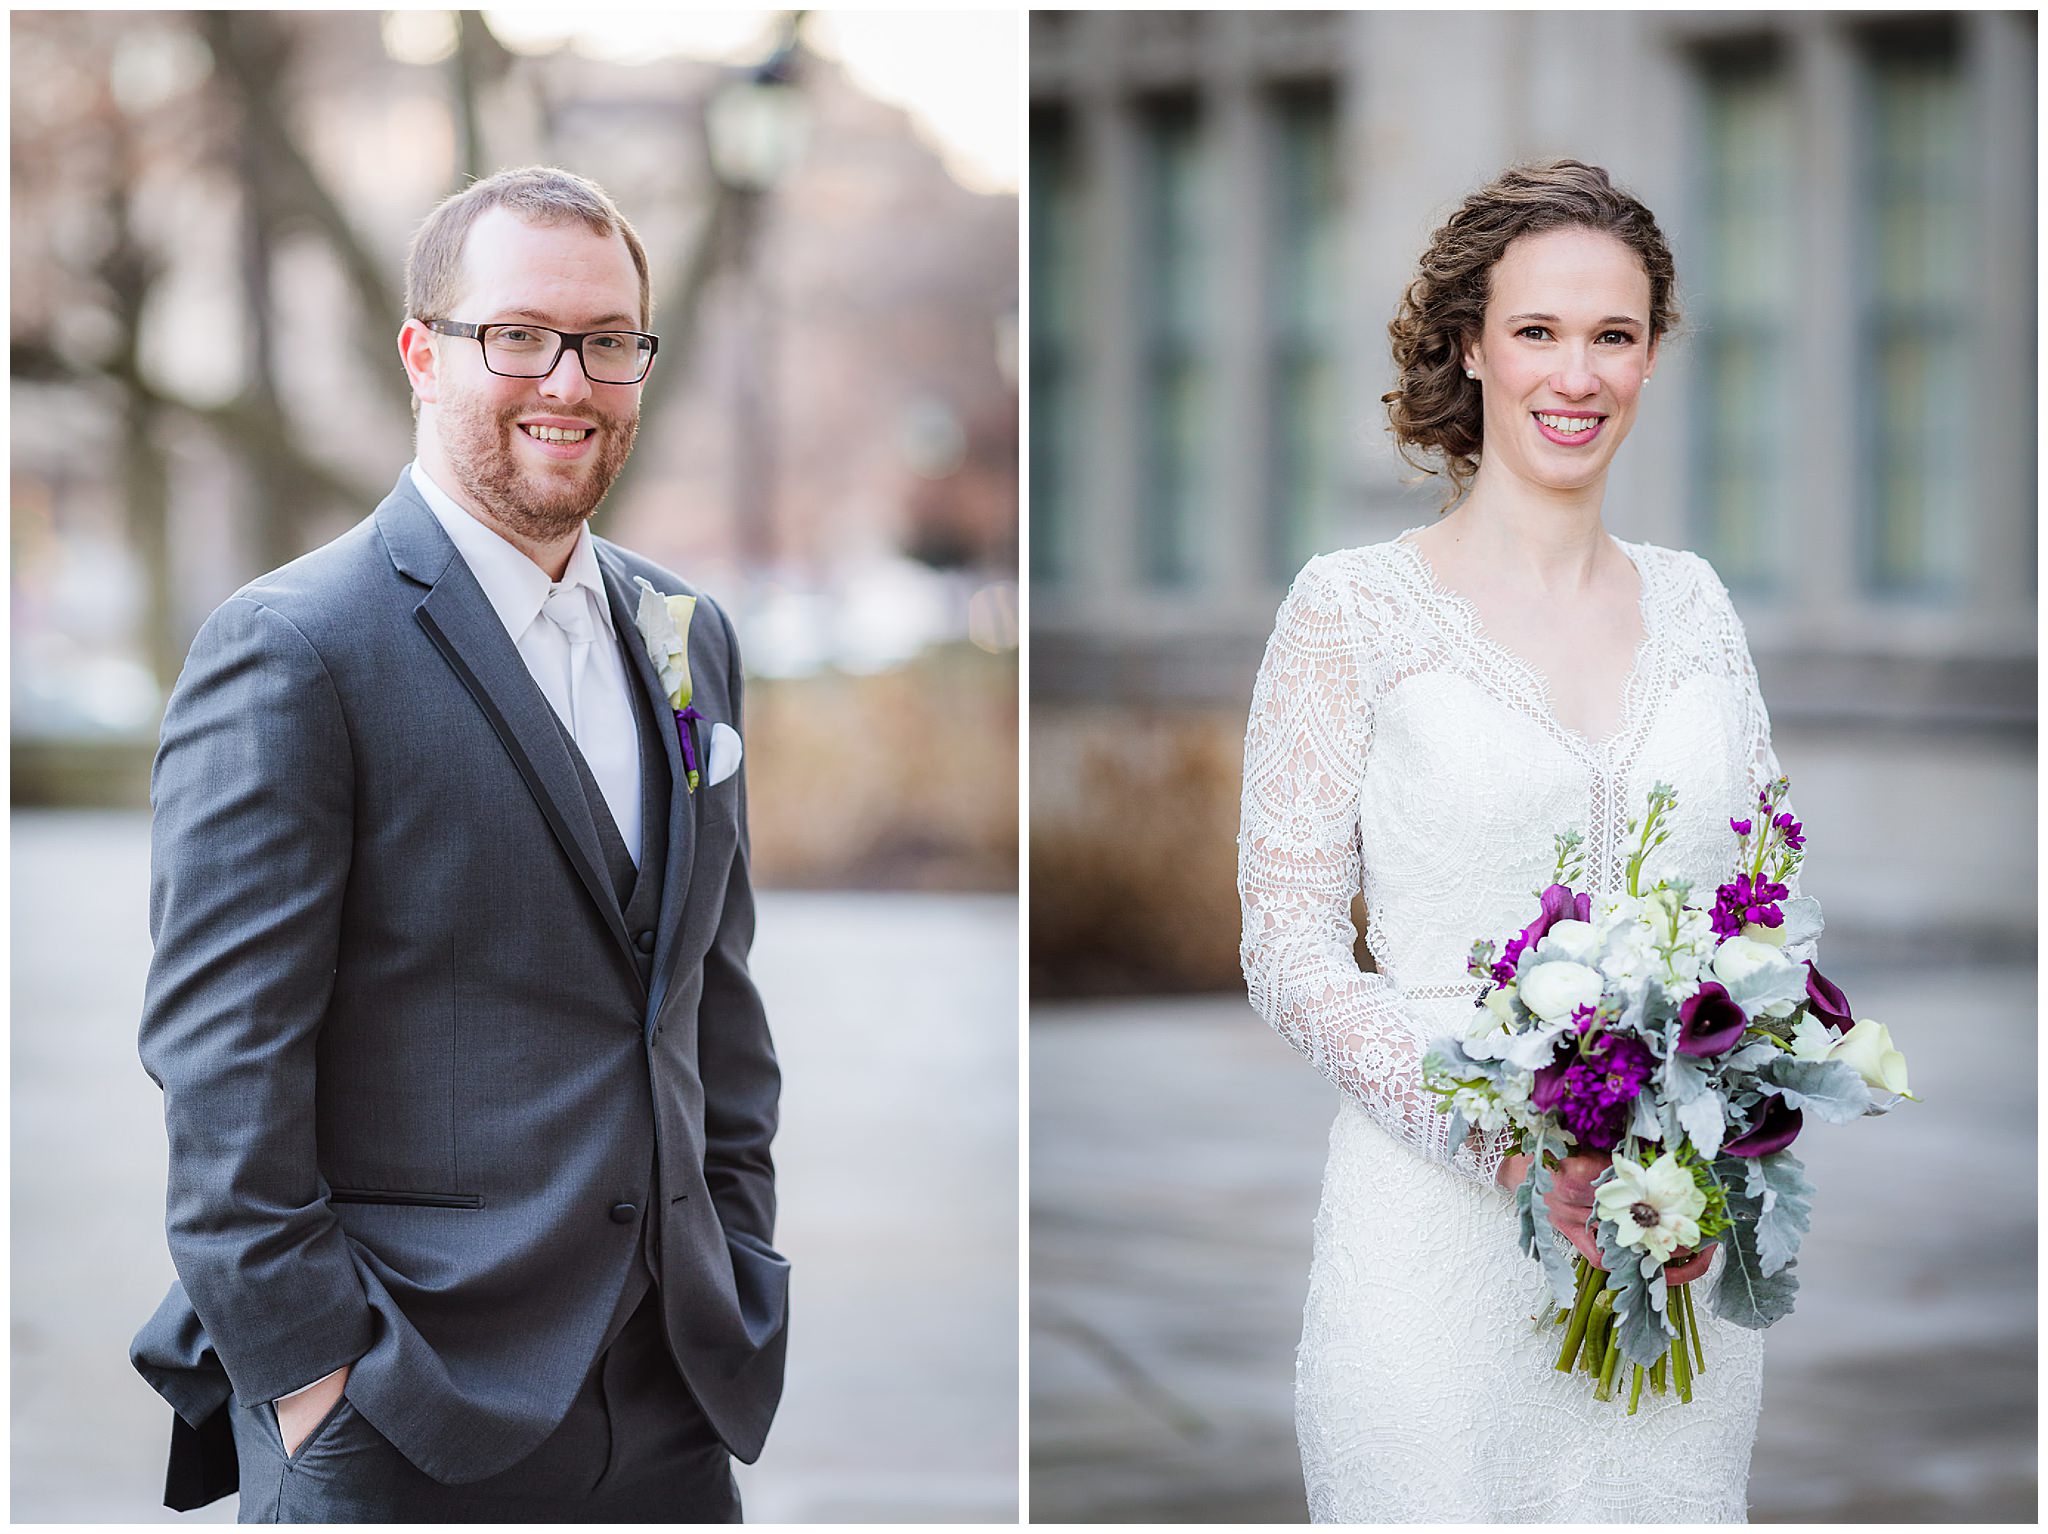 Bride & groom portraits at the Cathedral of Learning after a Heinz Chapel wedding